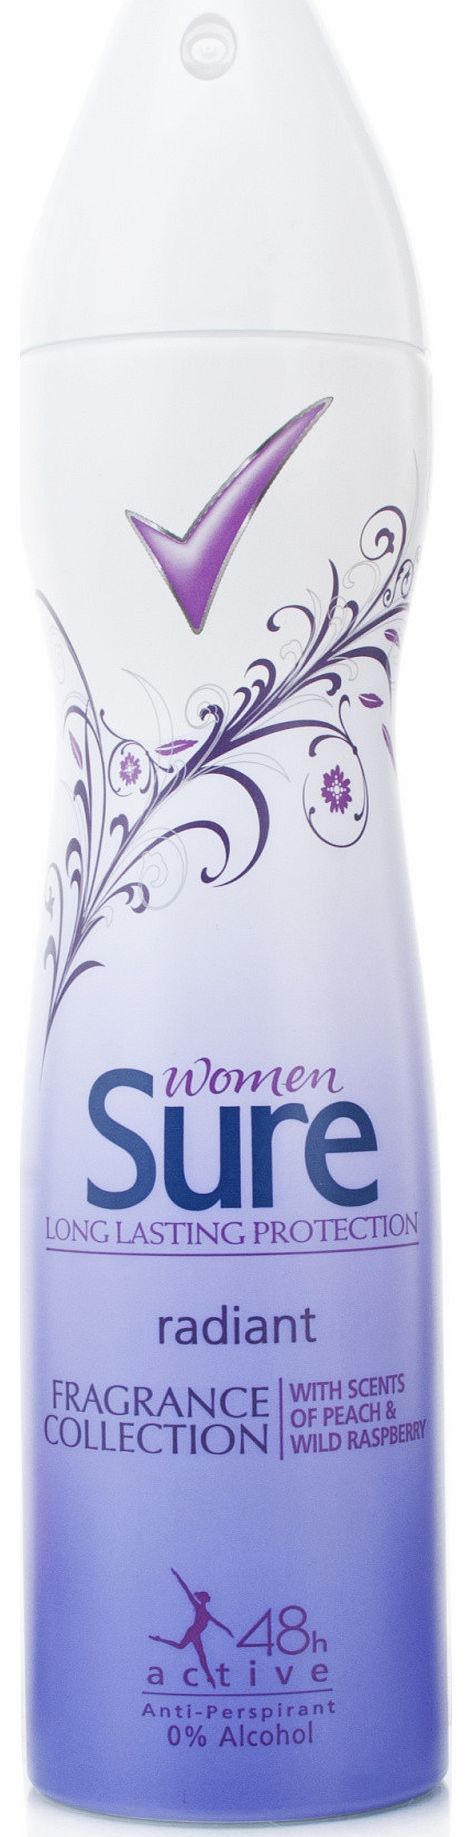 Sure Women Fragrance Collection Radiant 48h